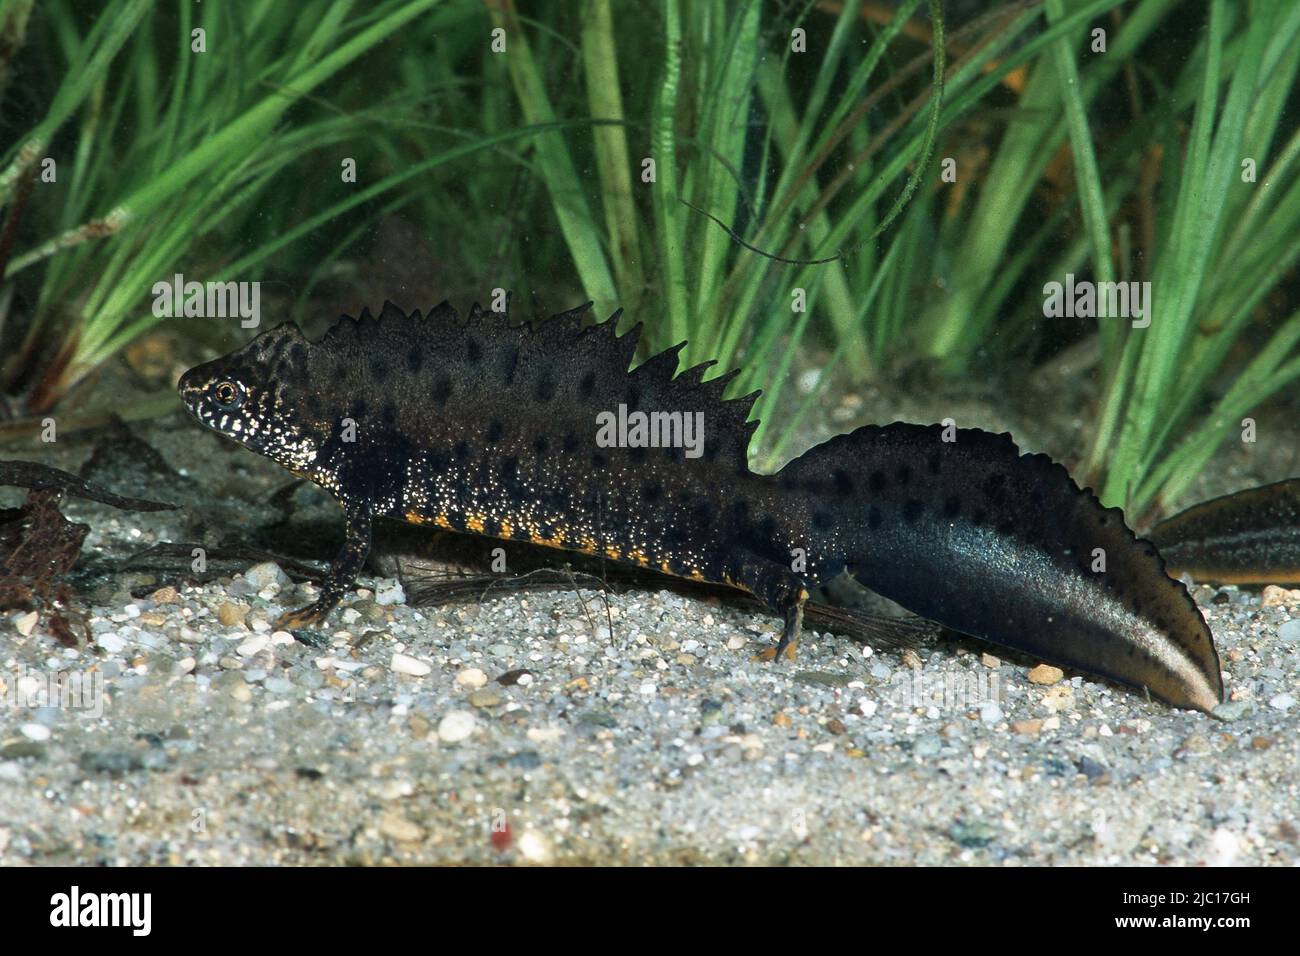 warty newt, crested newt, European crested newt (Triturus cristatus), male, Germany Stock Photo